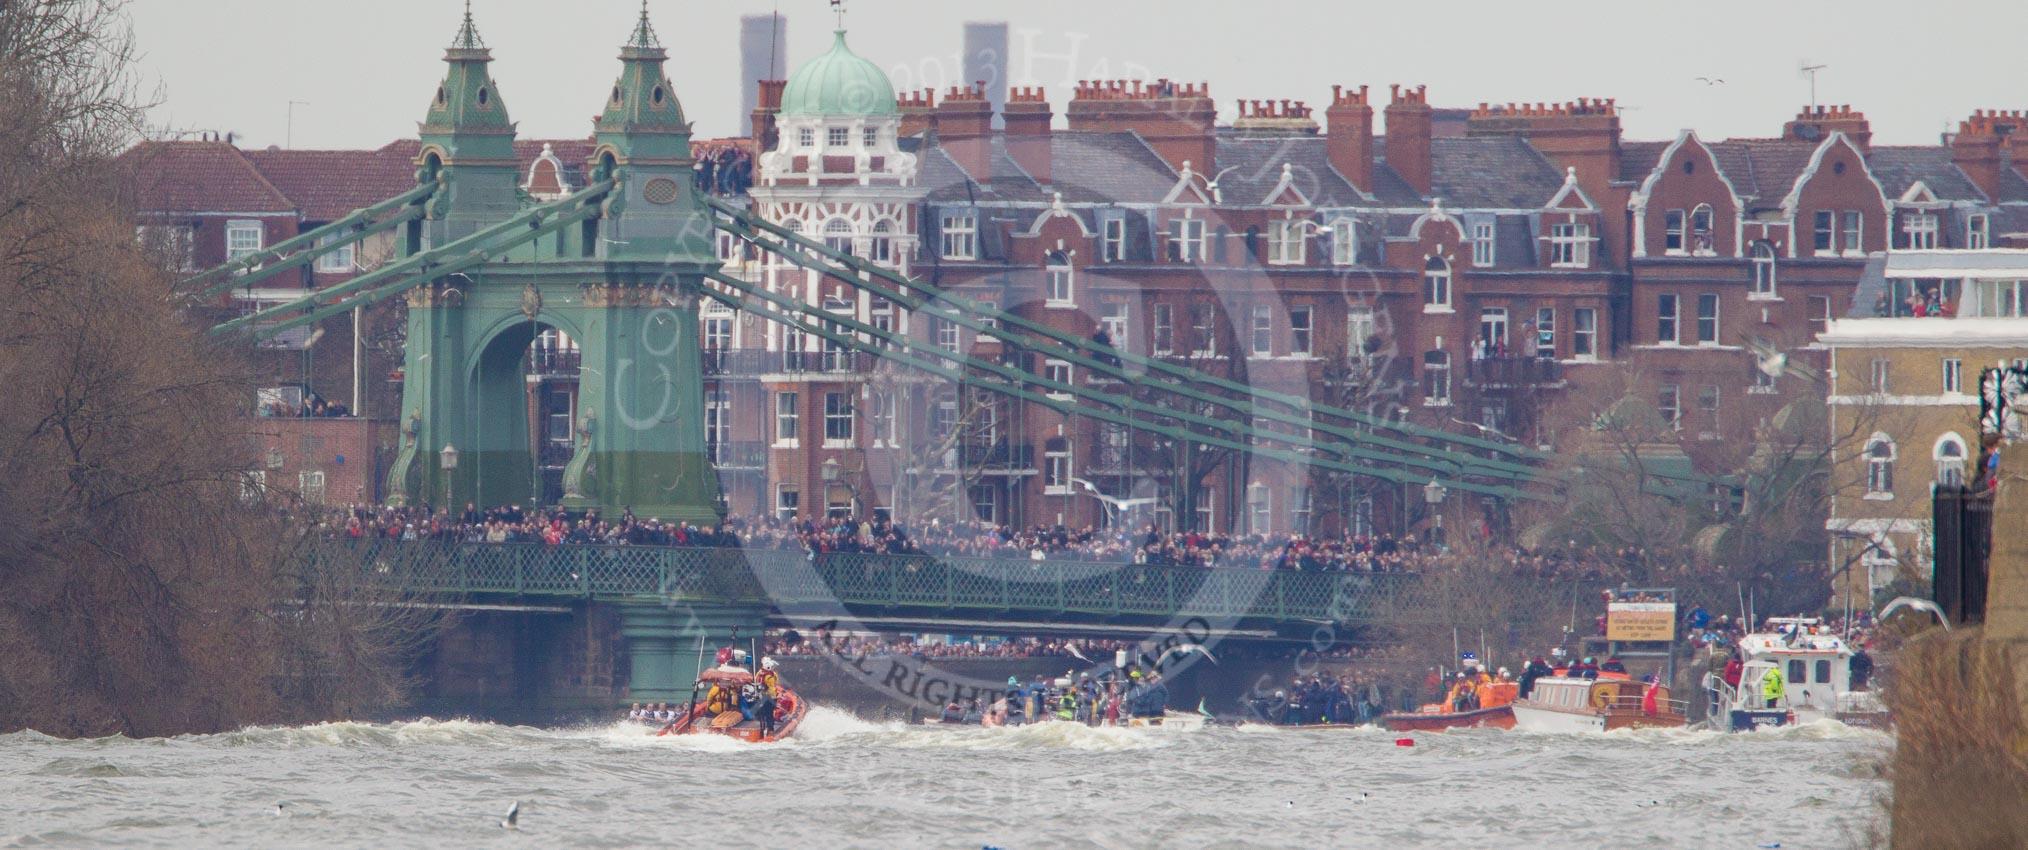 The Boat Race 2013.
Putney,
London SW15,

United Kingdom,
on 31 March 2013 at 16:37, image #349